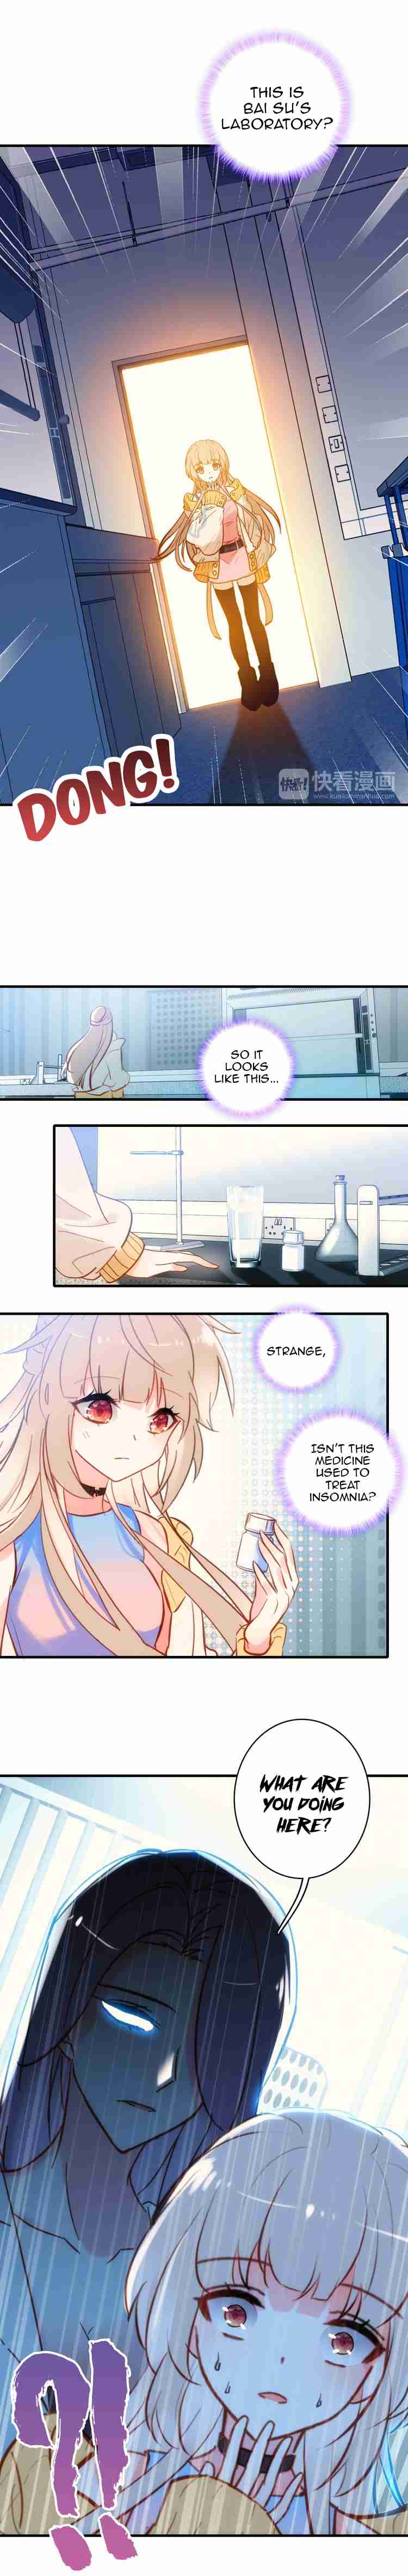 Star Shining in the Future Ch. 3 Chapter 3